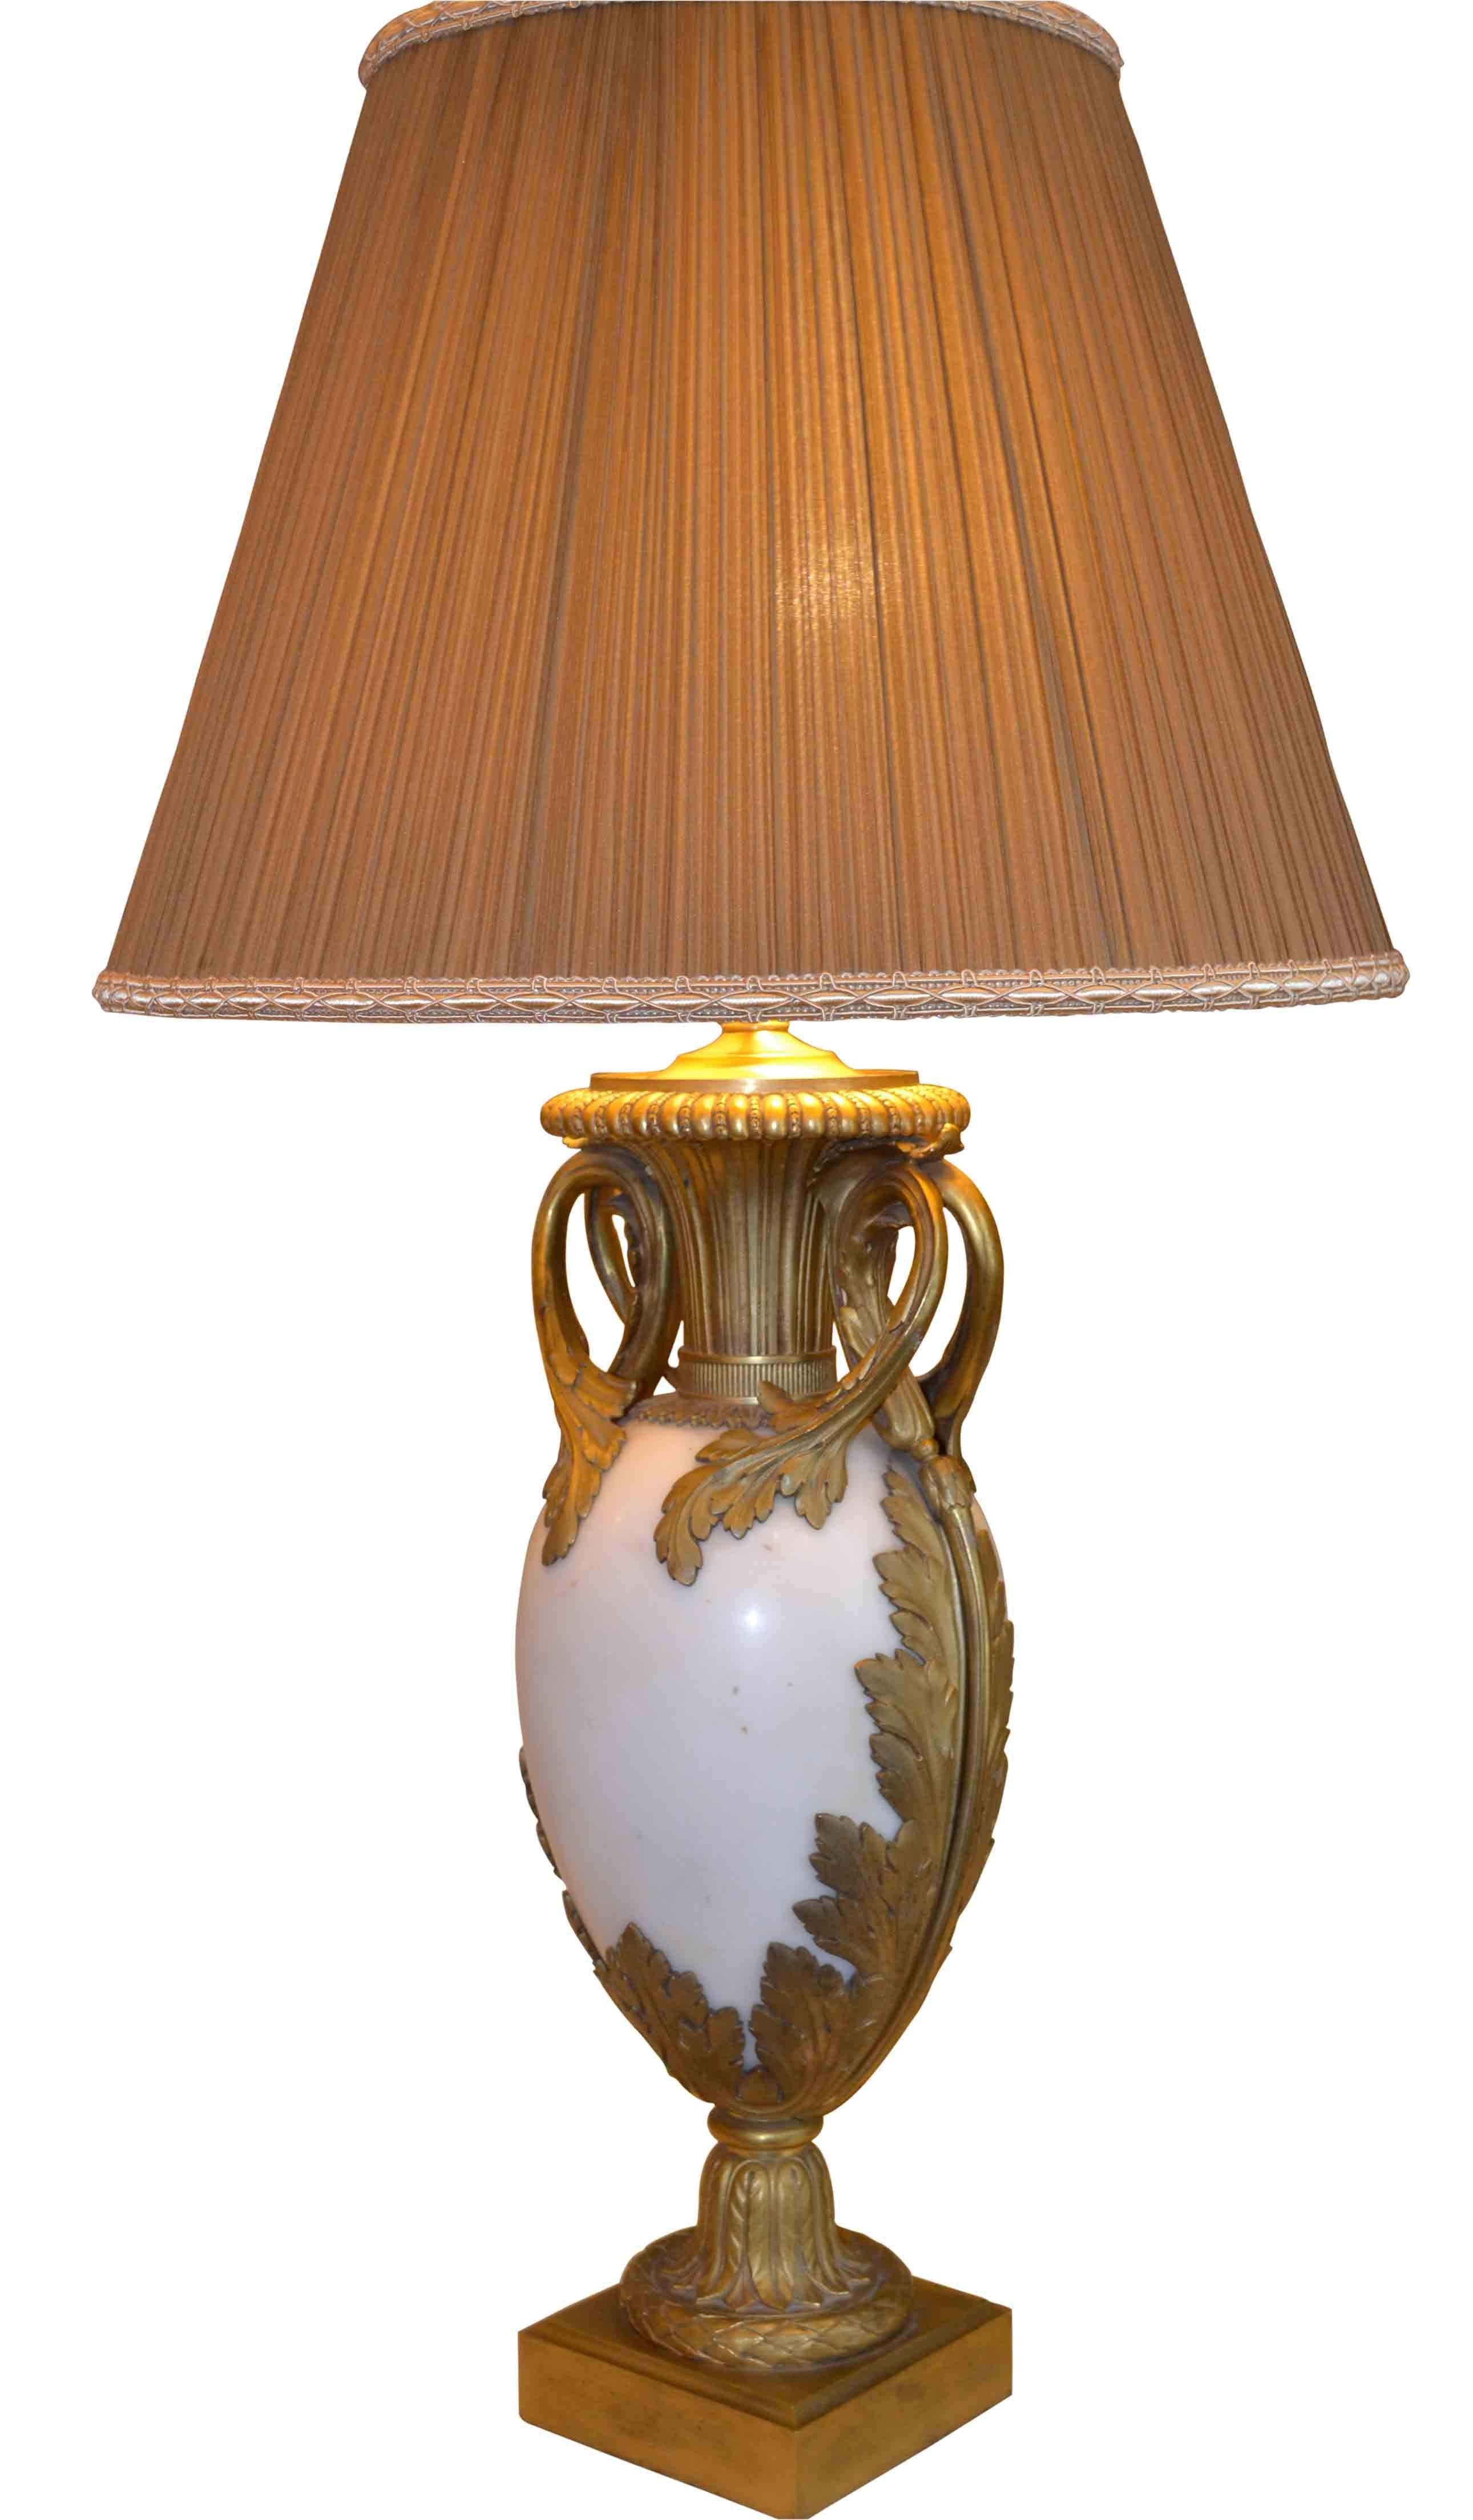 A fine quality Louis XVI style gilt bronze and white marble classically shaped urn now converted to a lamp. The egg shaped white marble body is richly mounted in finely chased gilded bronze, pleated silk beige shade.